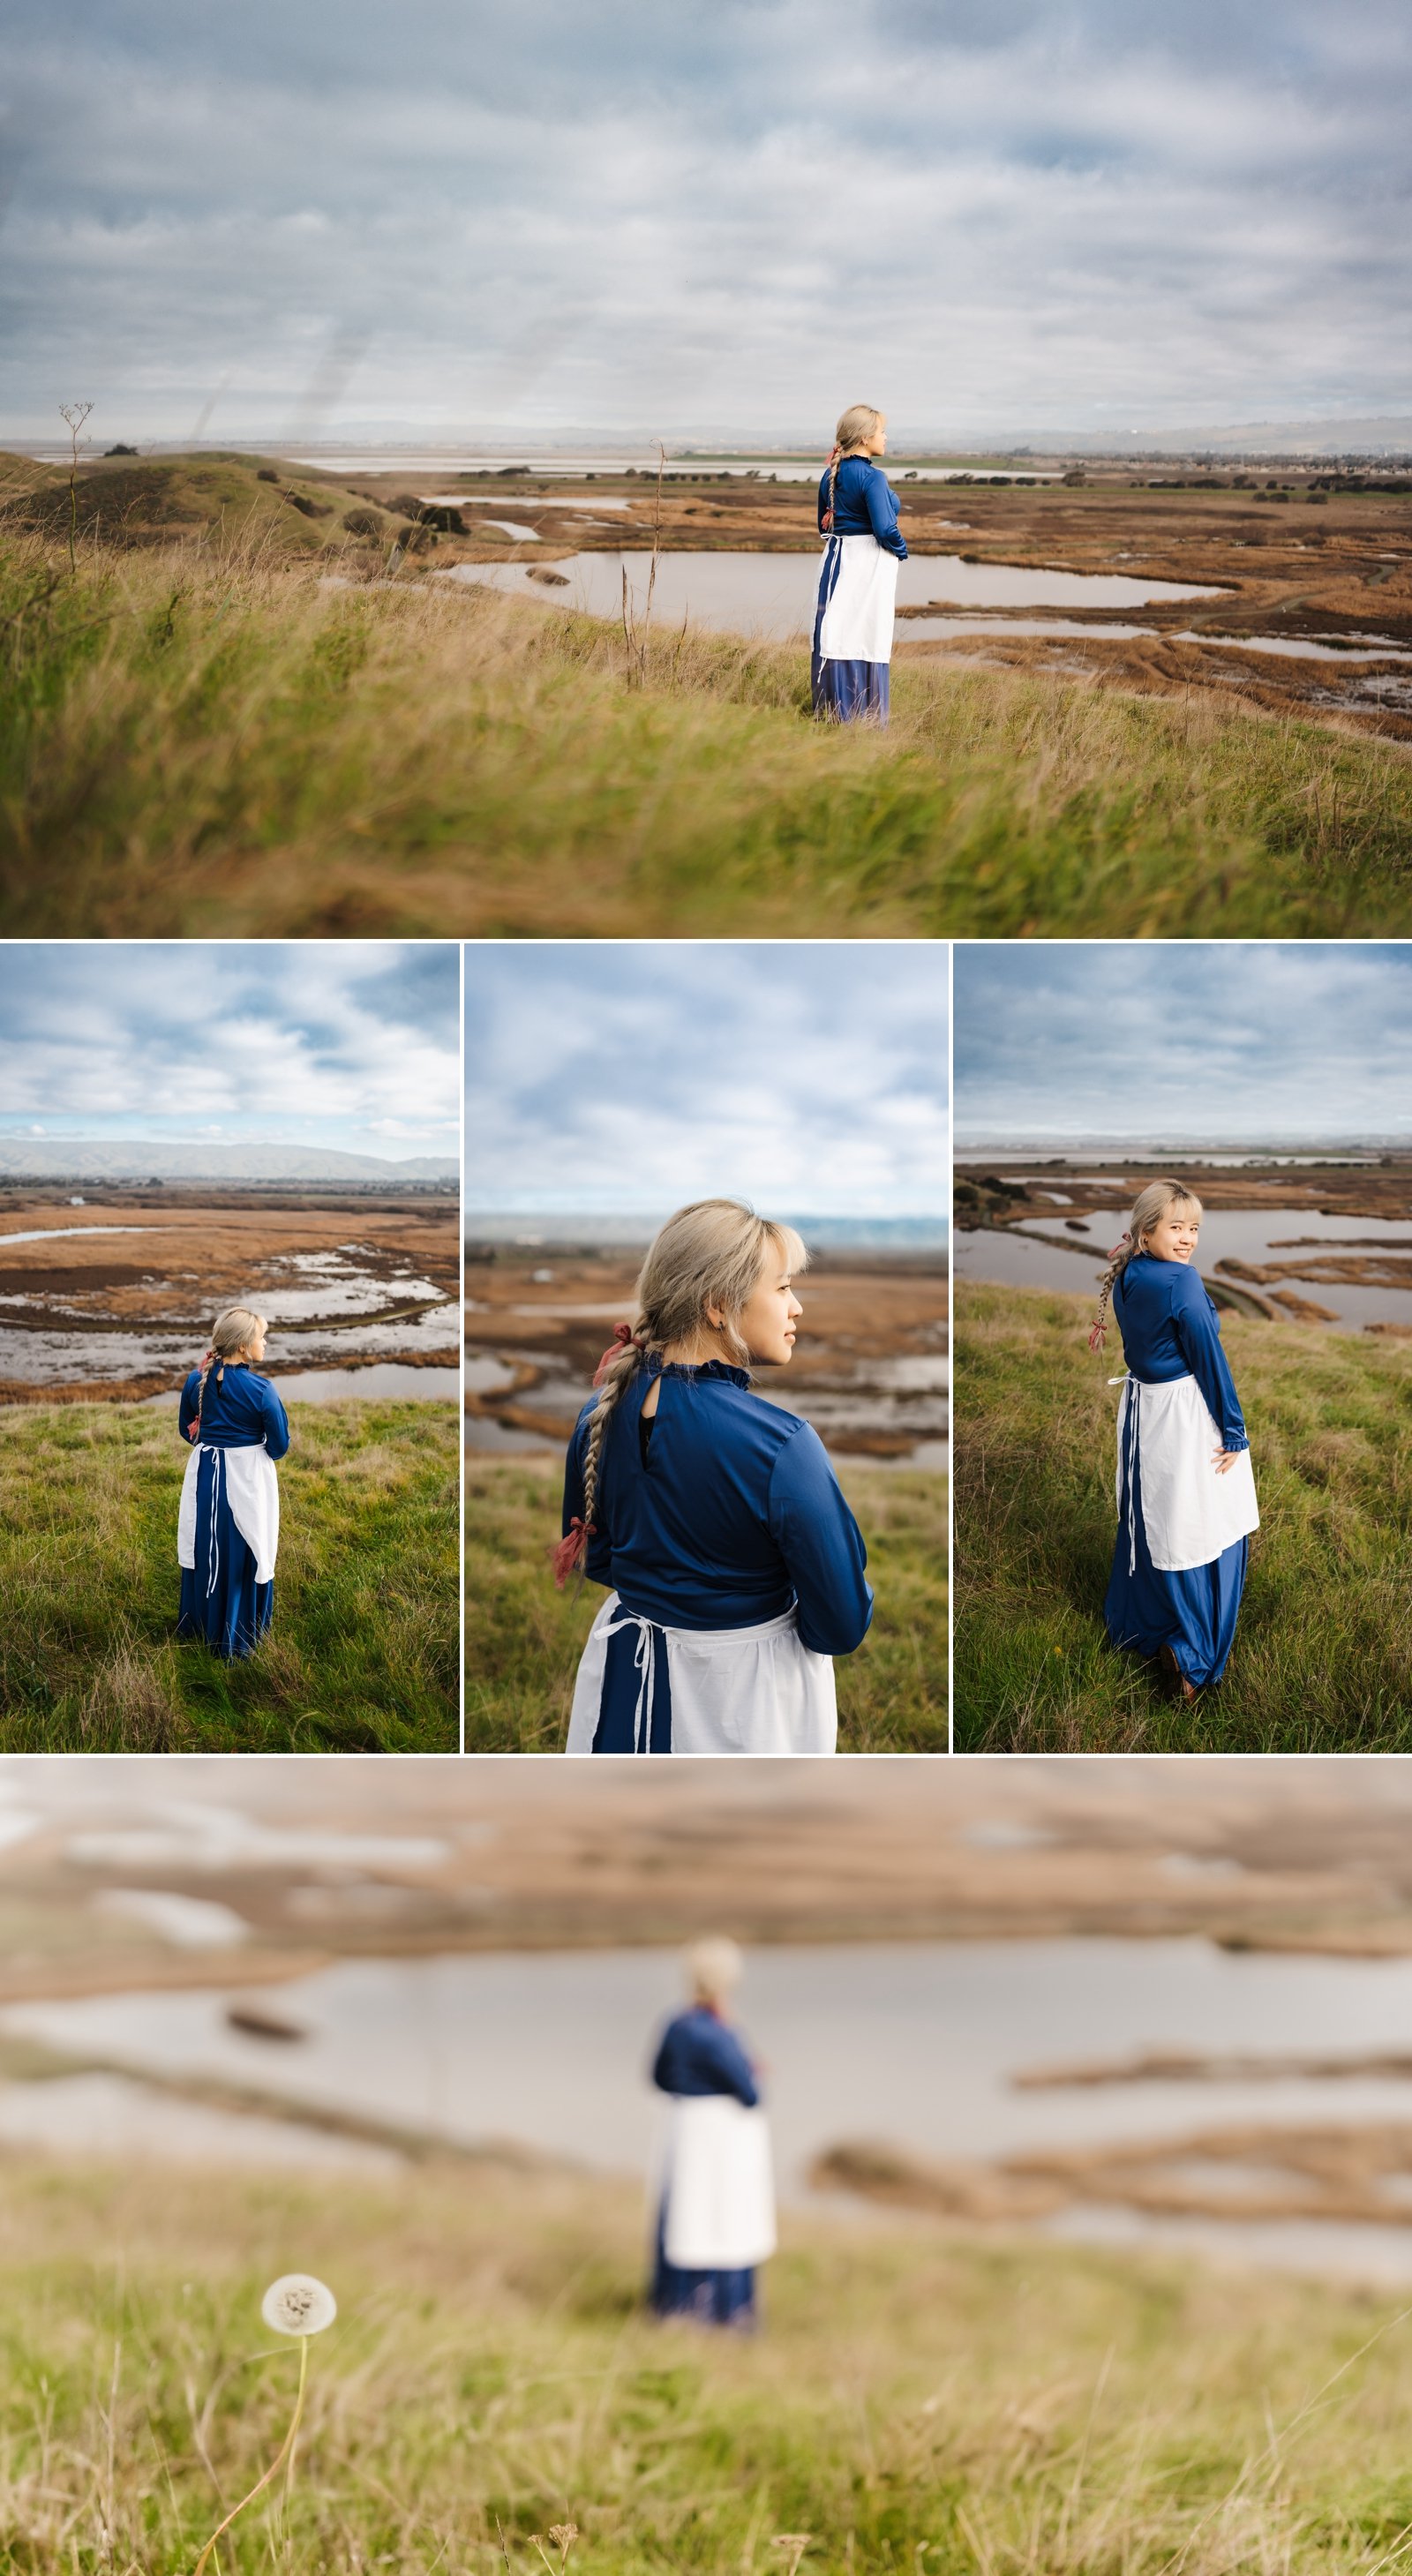 howl's moving castle sophie cosplay photoshoot bay area cosplay photographer 1.jpg